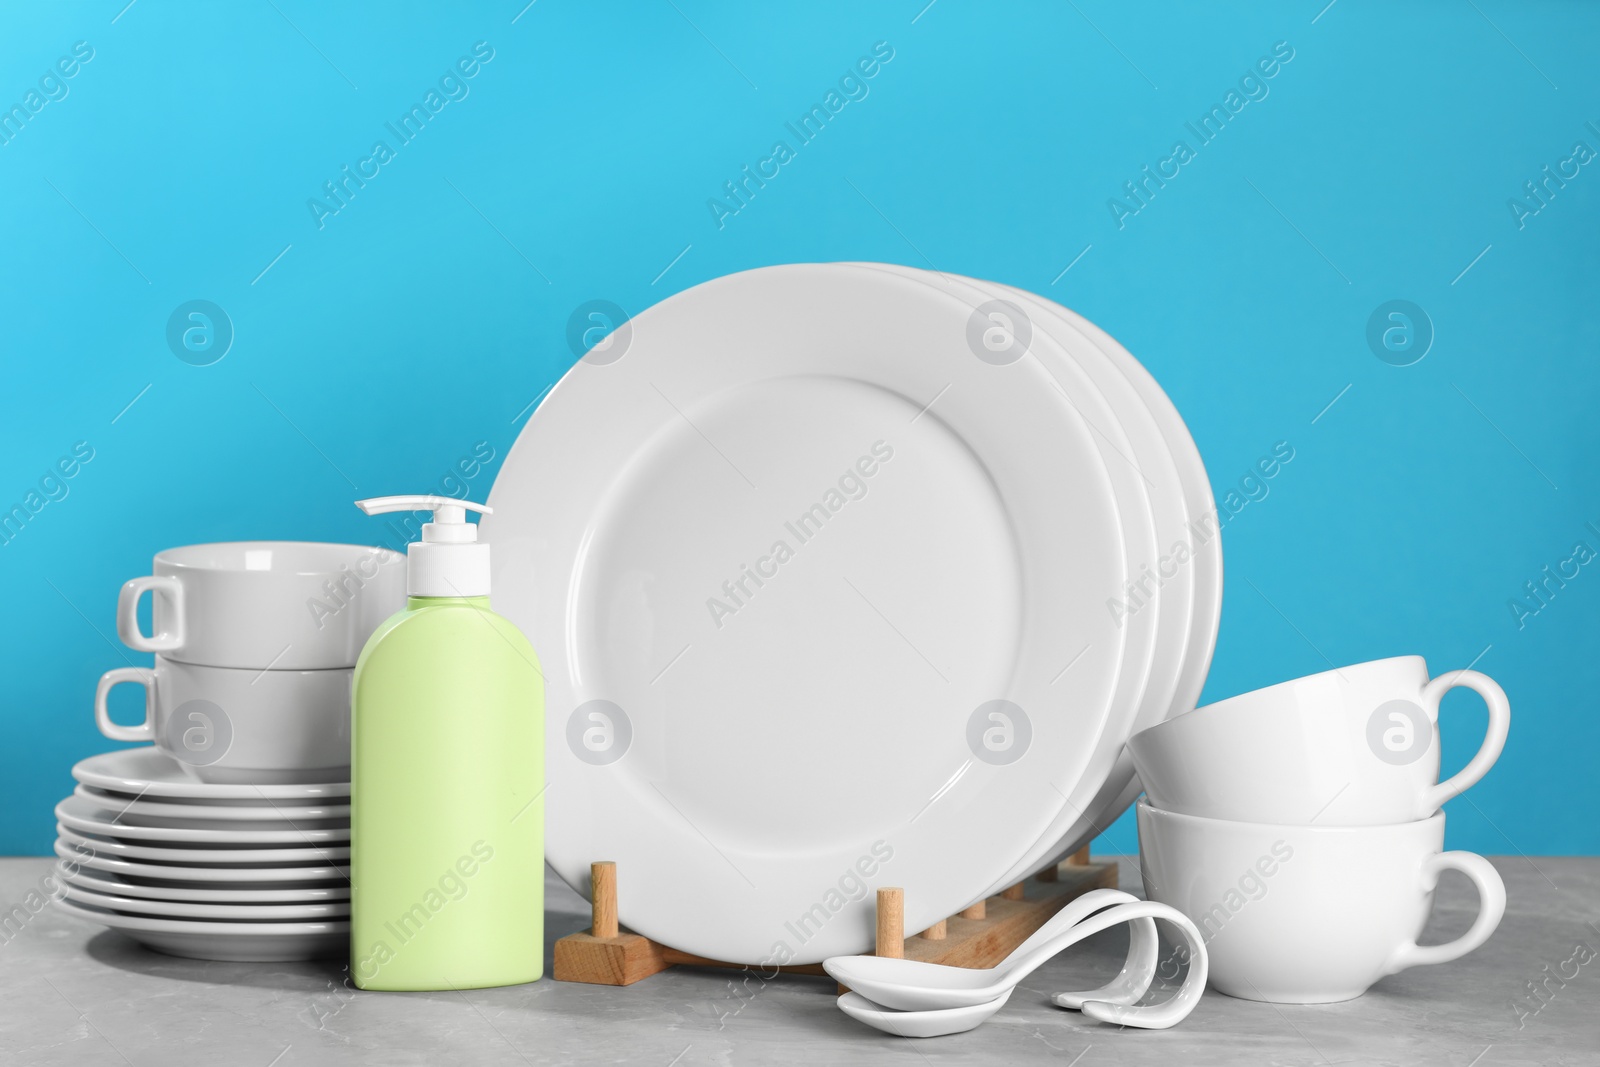 Photo of Set of clean tableware and dish detergent on grey table against light blue background